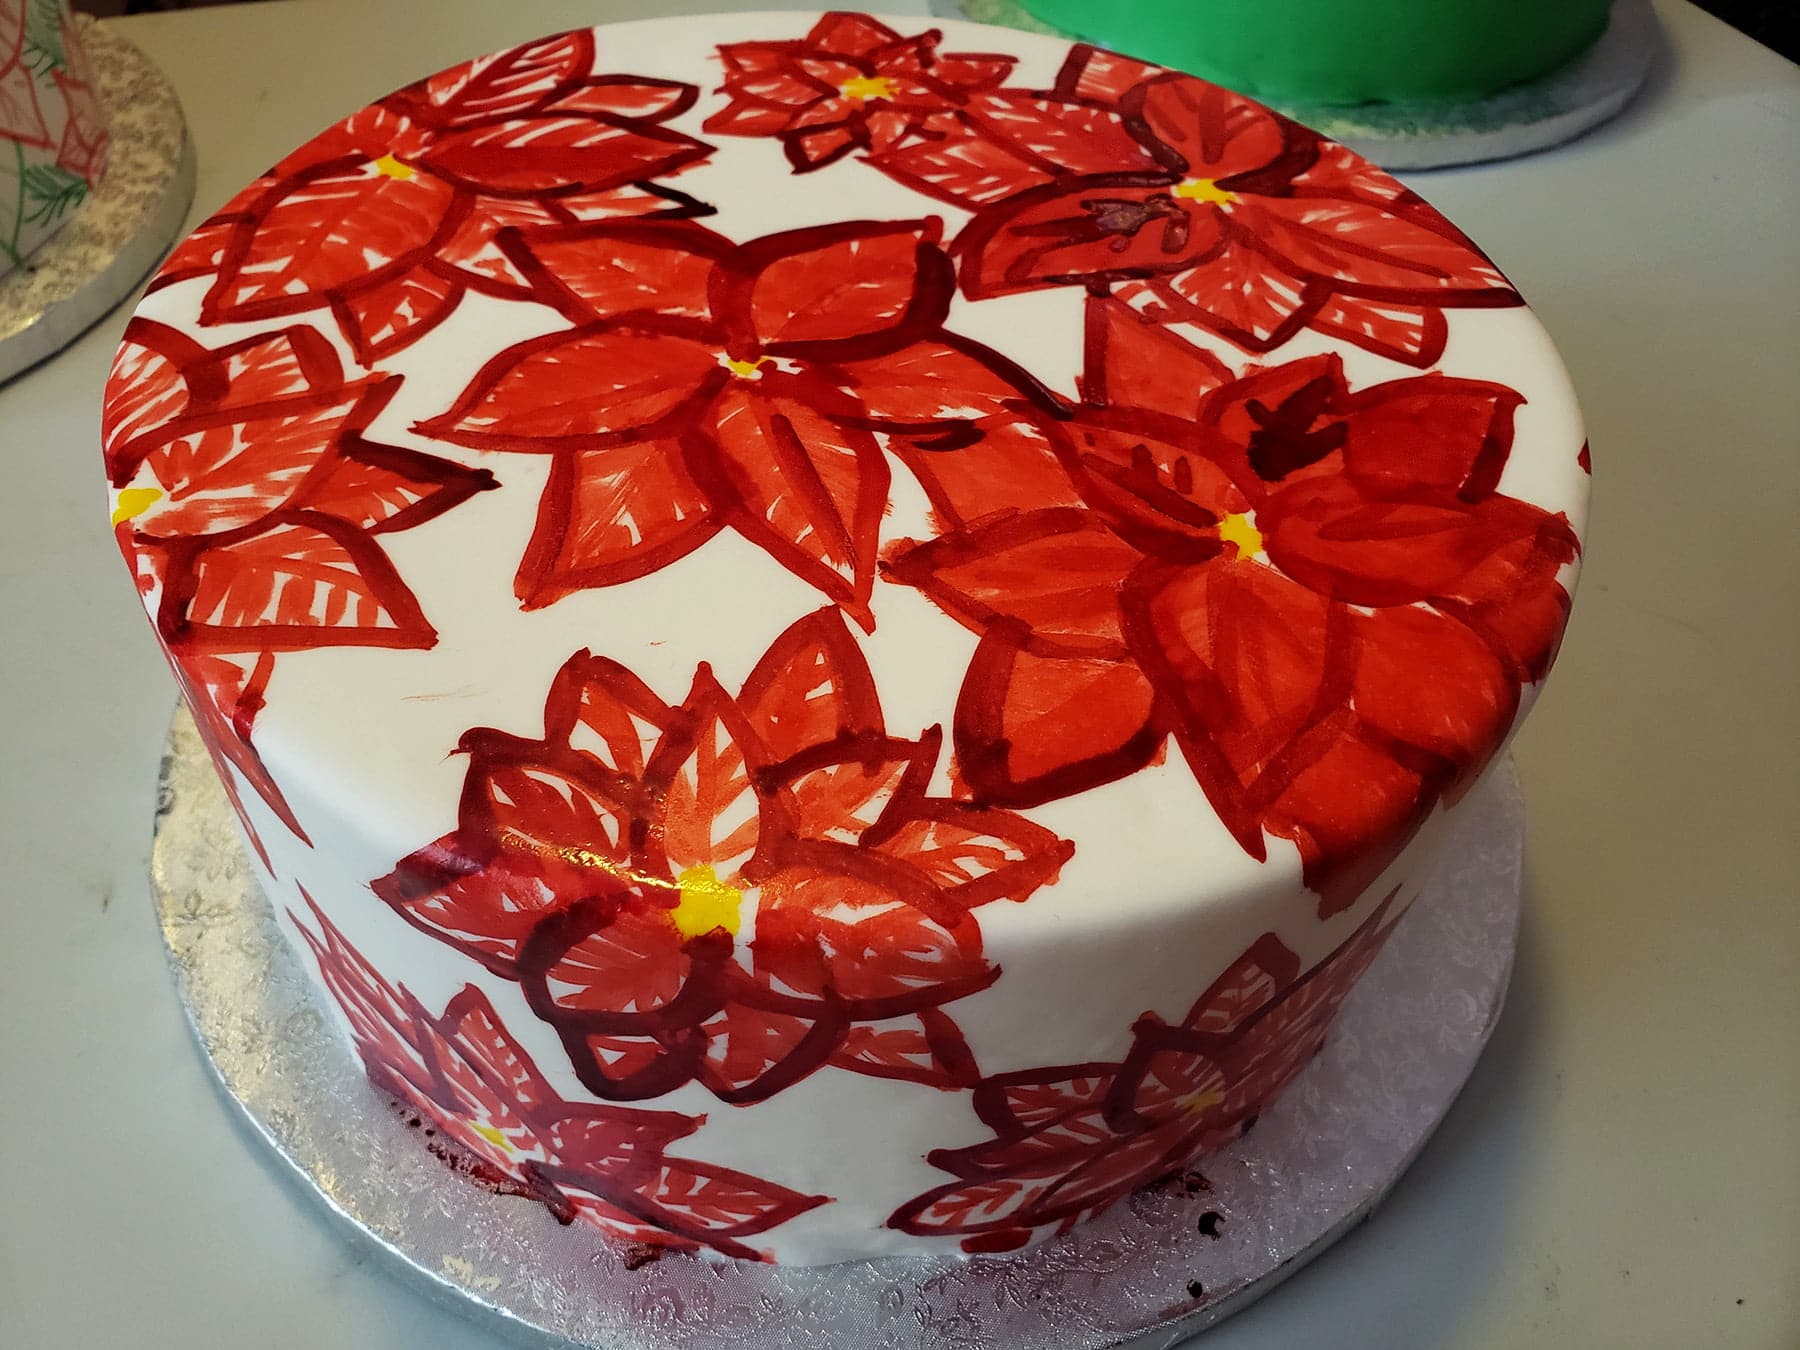 A large round cake is covered in a hand painted poinsetta design, in reds with yellow accents.